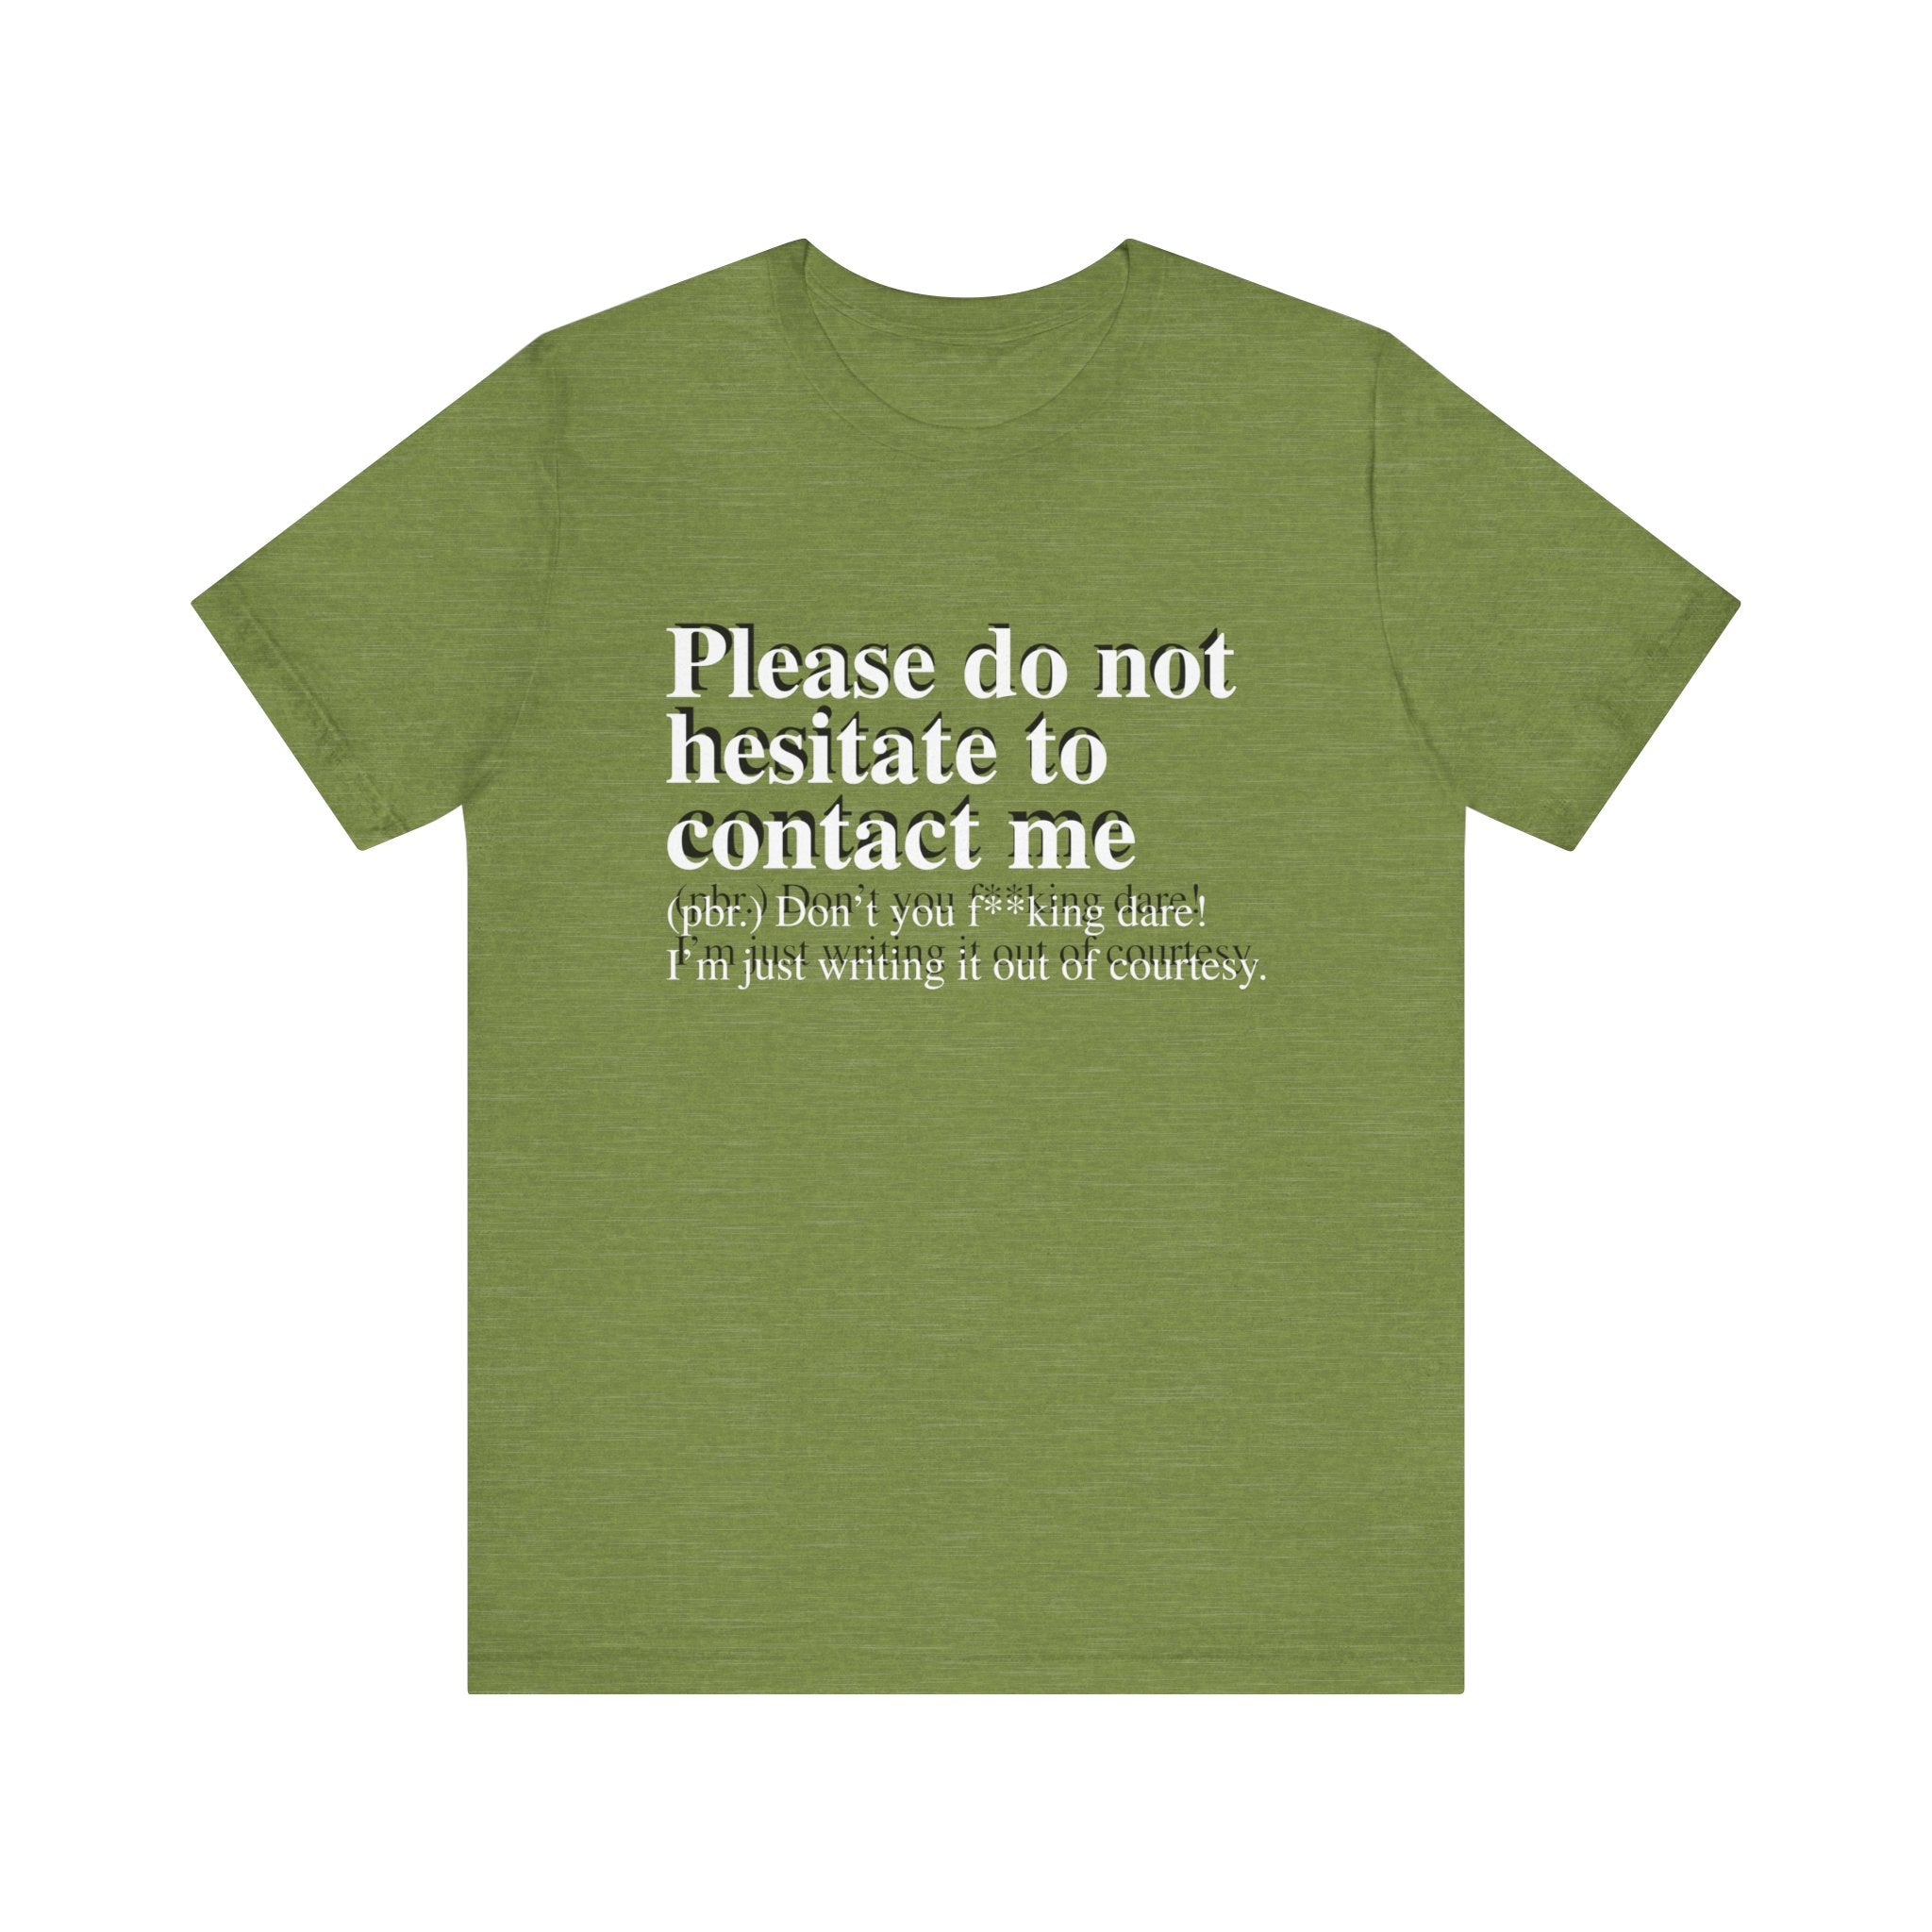 Olive green unisex jersey tee with text saying "Please Do Not Hesitate to Contact Me T-Shirt (pbr: don't you f*ing dare! I’m just writing it out of courtesy.)